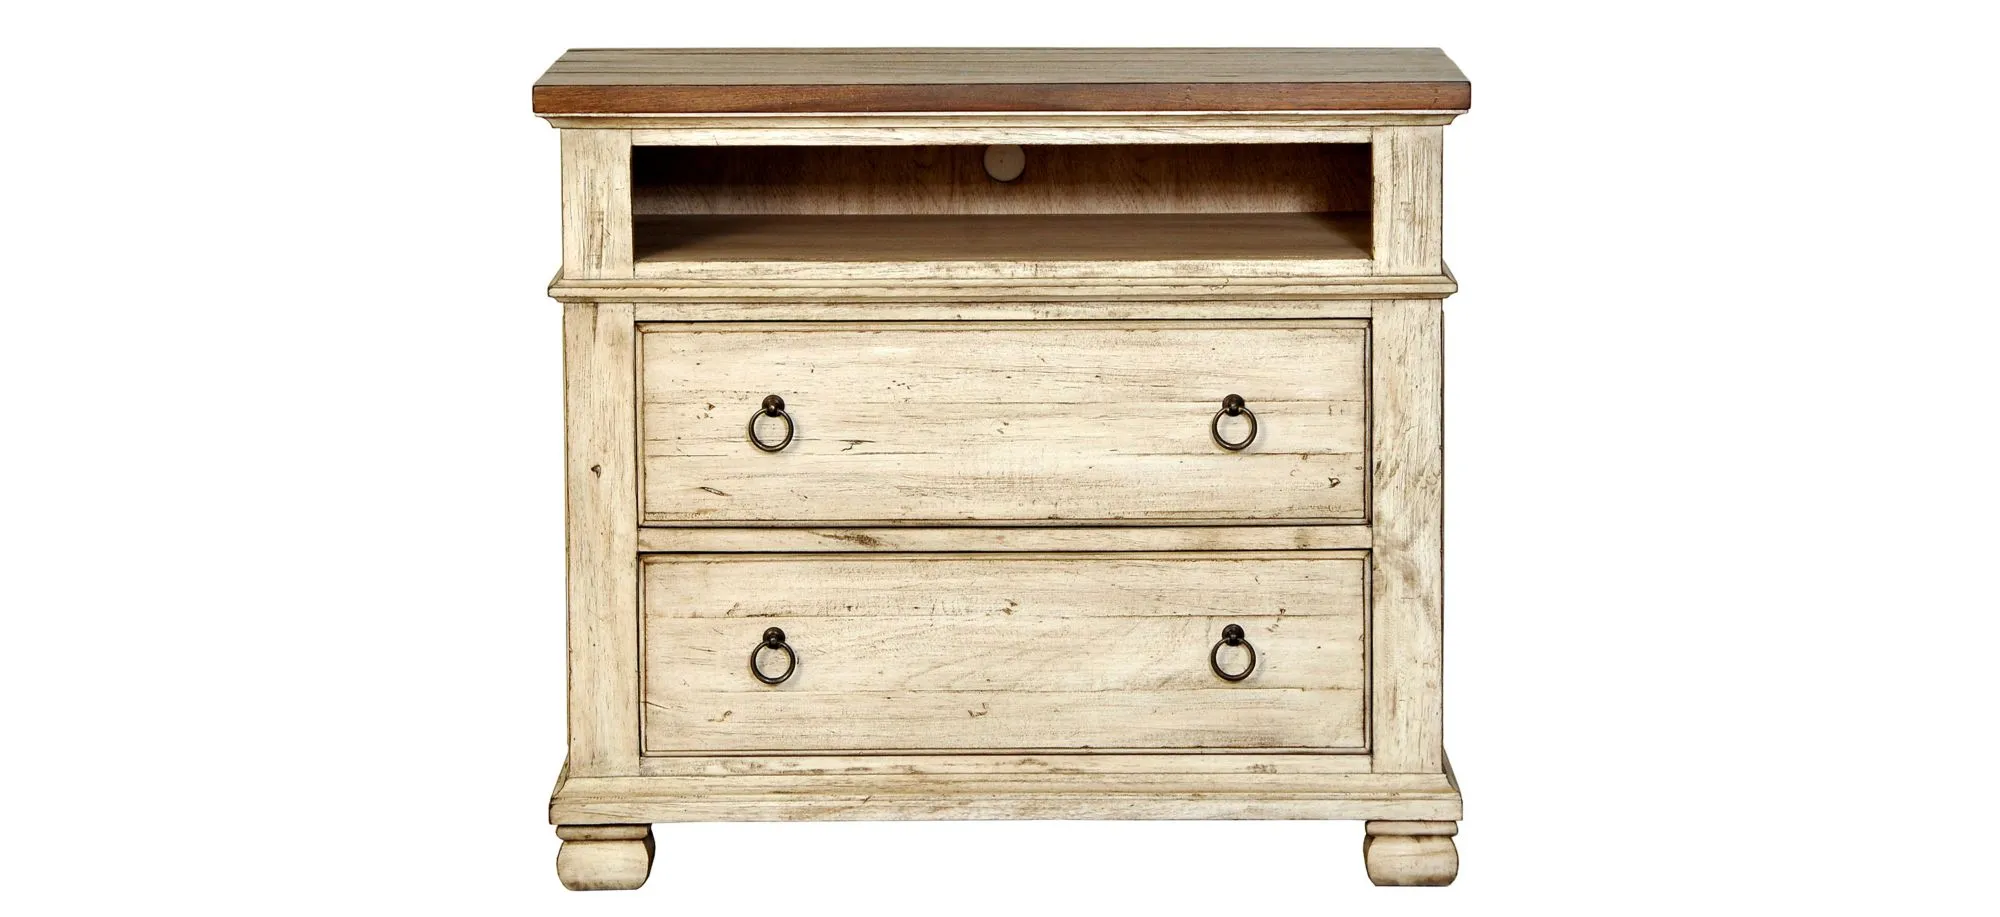 Belmont Media Chest in Timbered Brown Farmhouse & Antique Linen by Napa Furniture Design